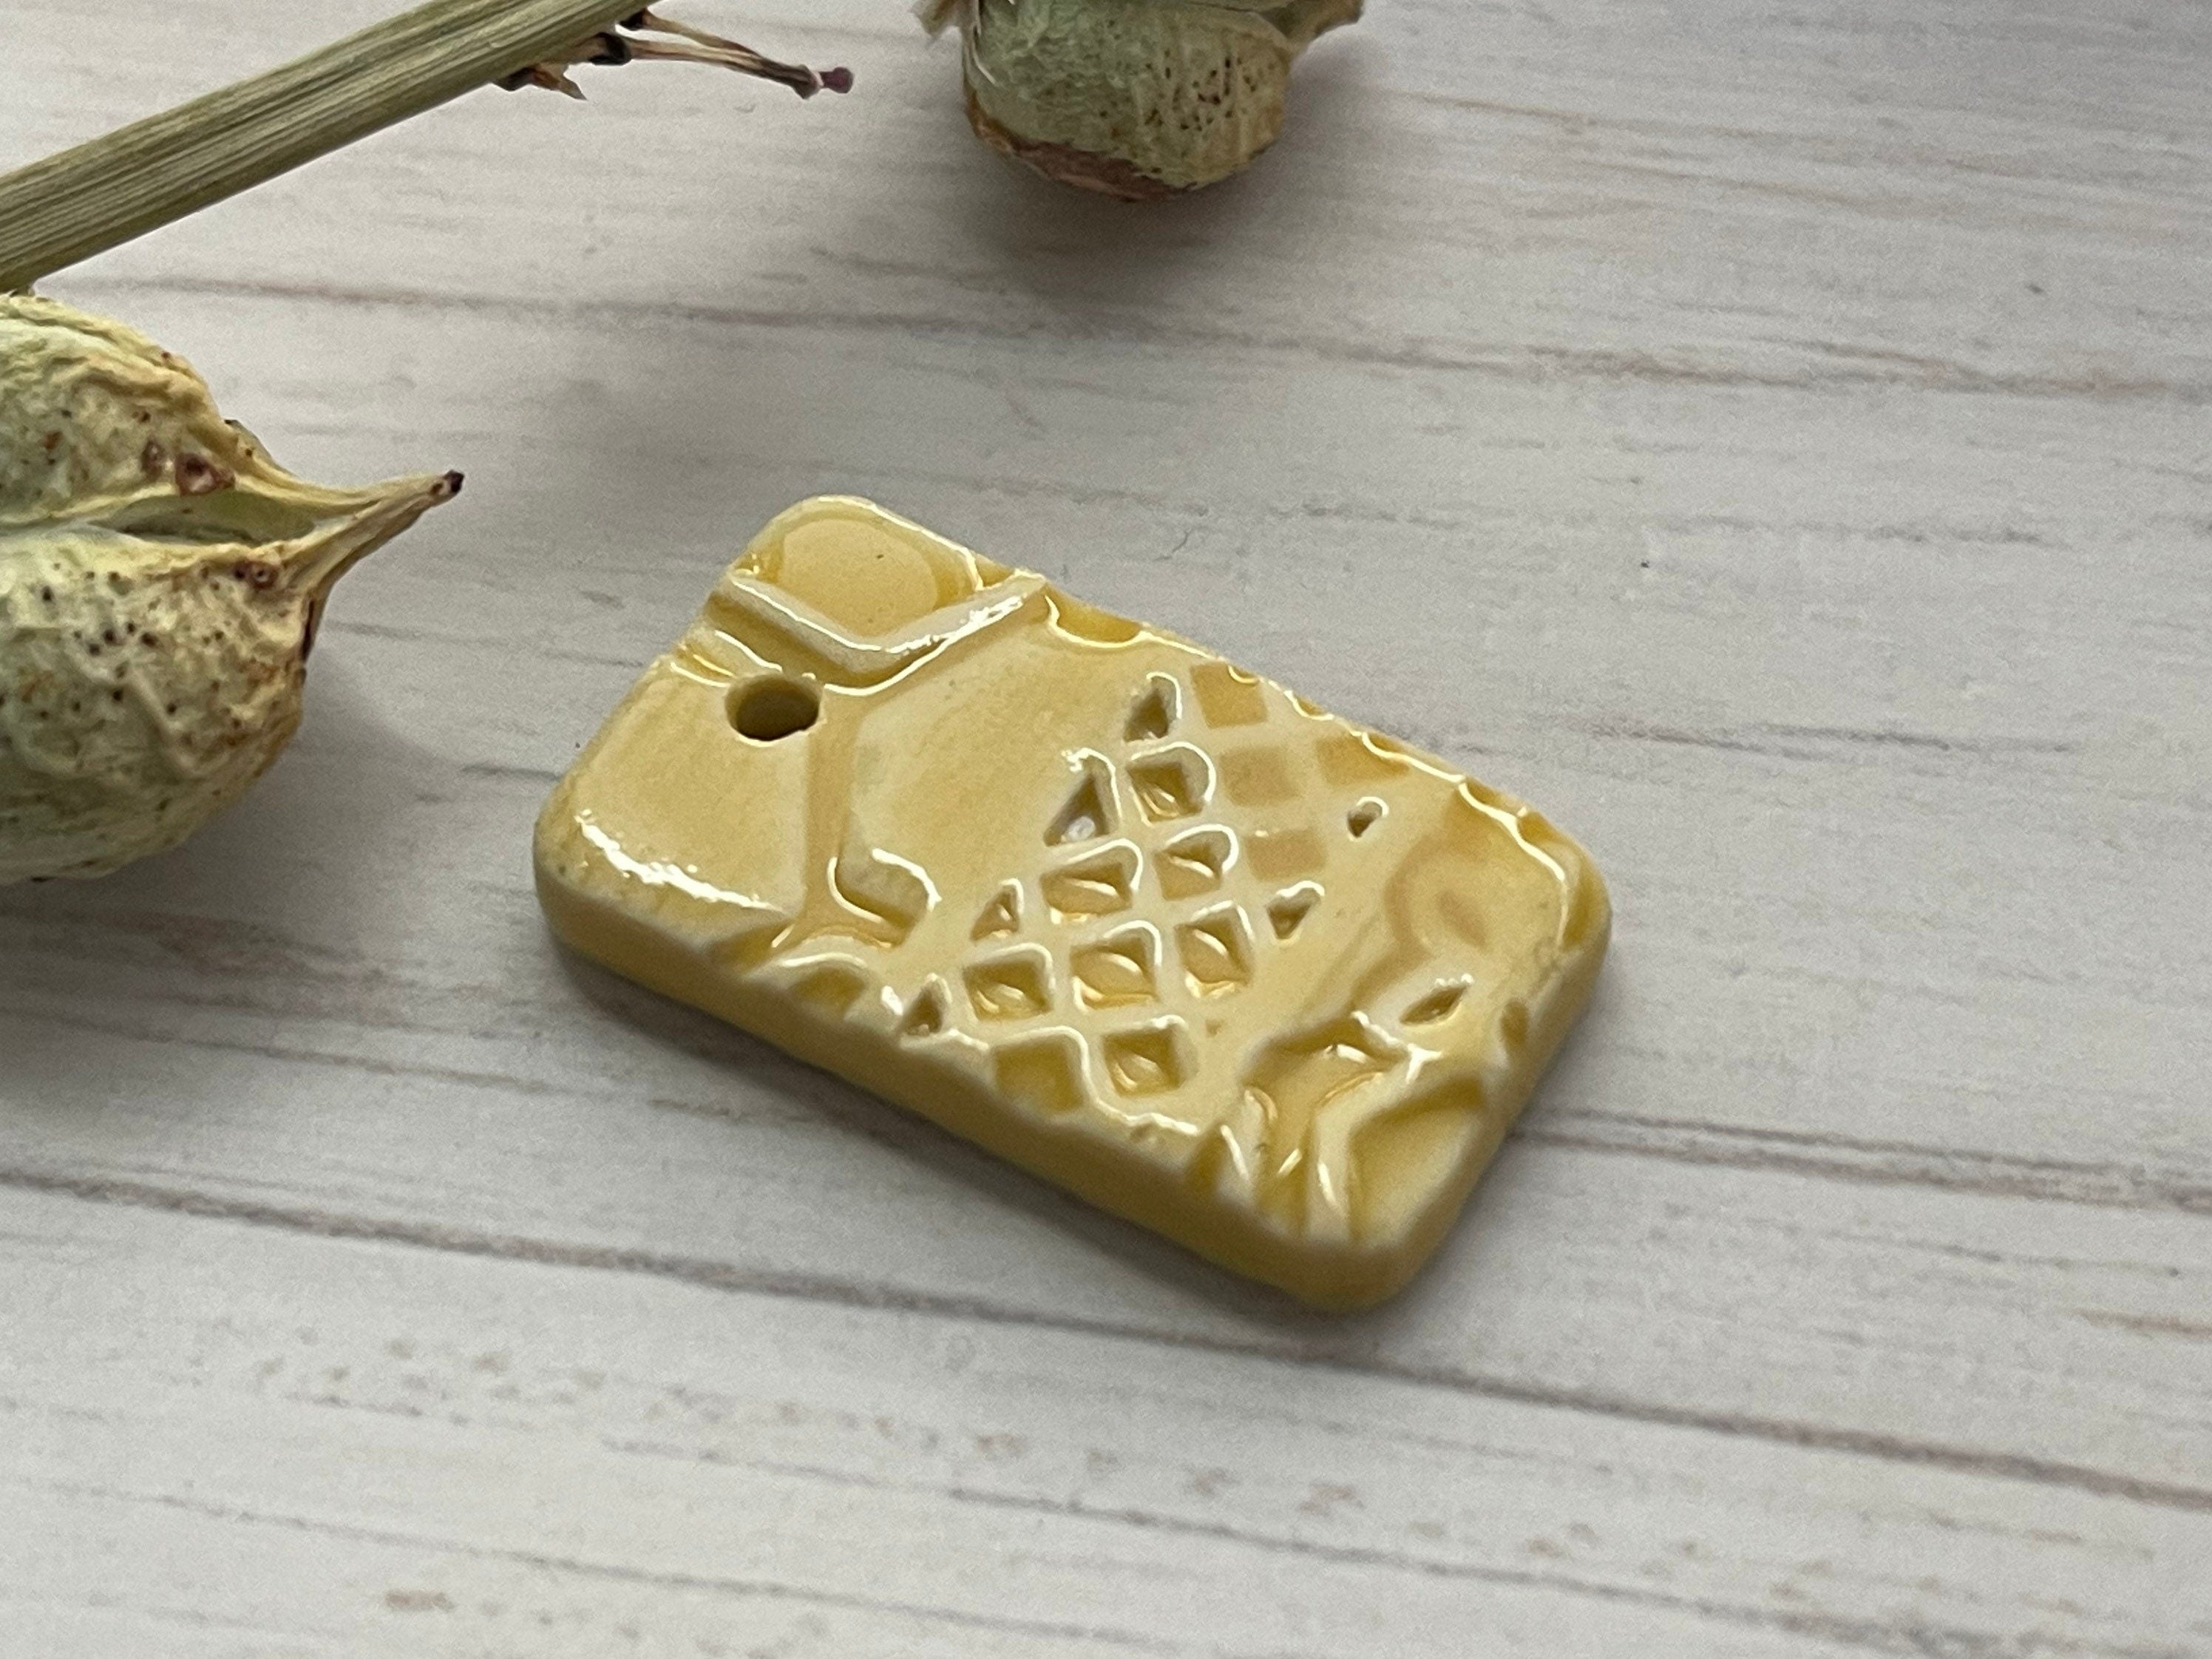 Honeycomb Pendant Bead, Porcelain Beads, Ceramic Charms, Jewelry Making Components, DIY Necklace Beads, Pendant